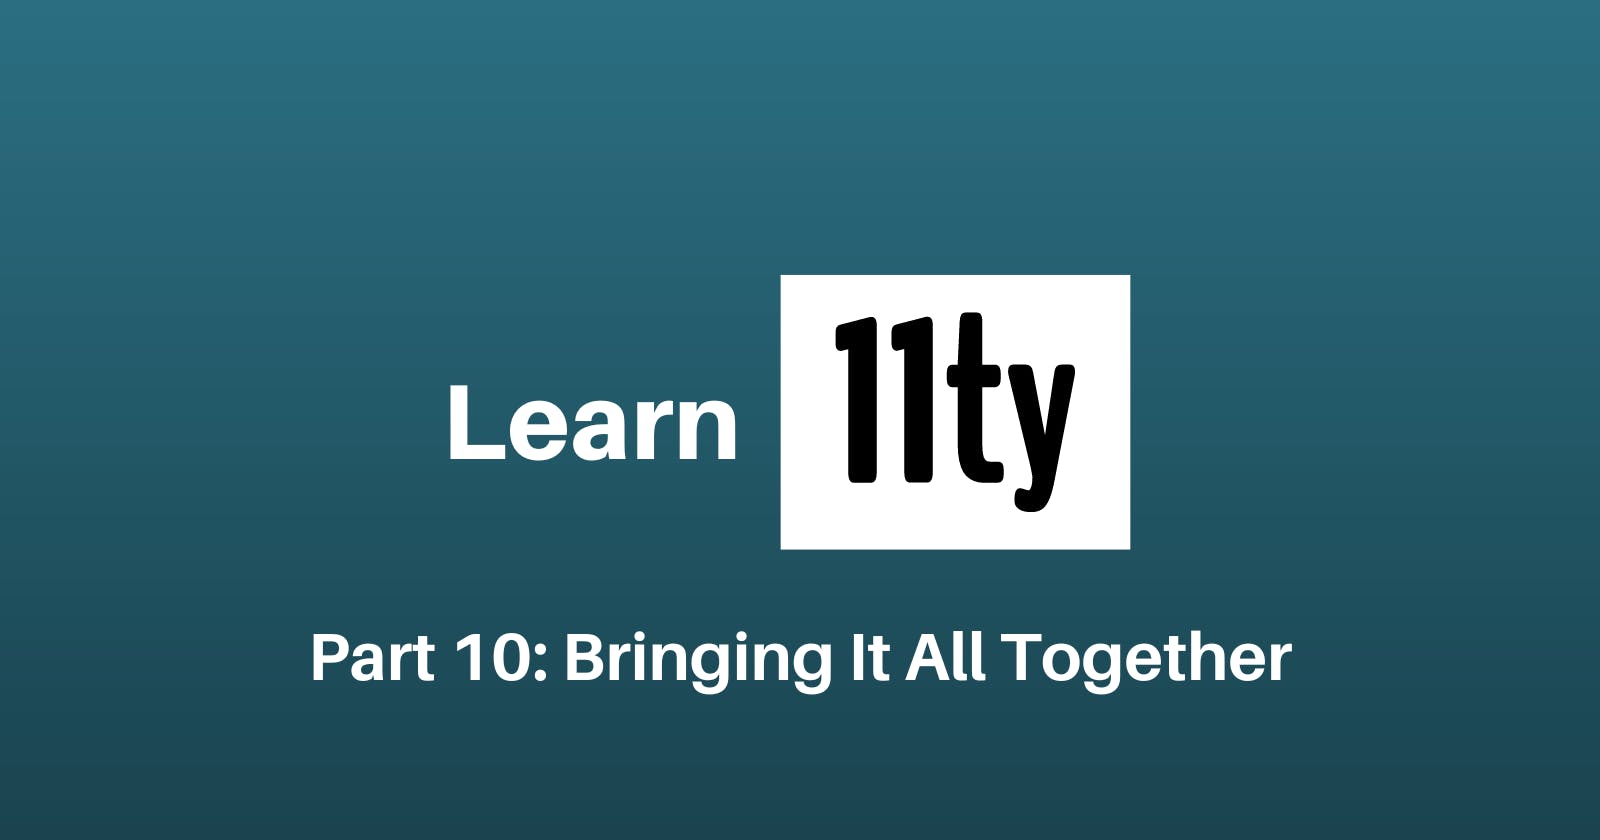 Let's Learn 11ty Part 10: Bringing It All Together